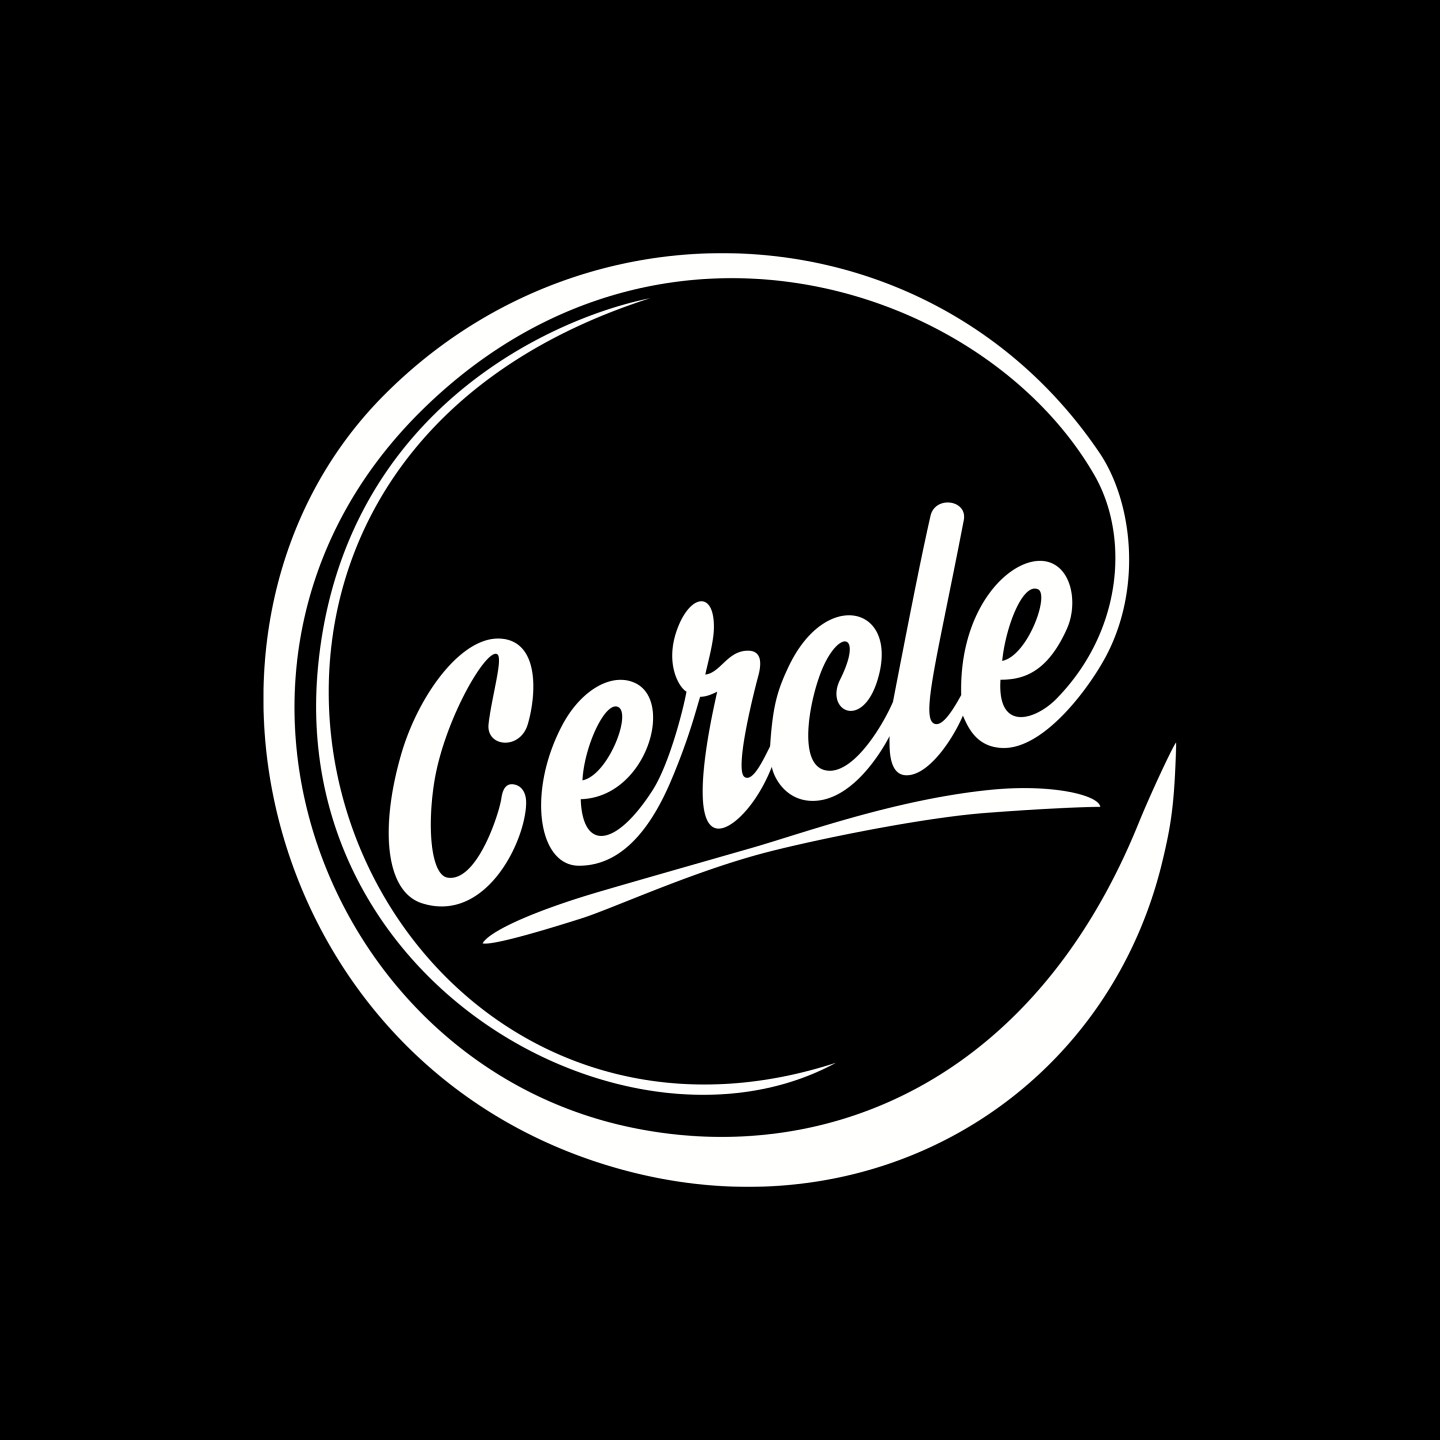 Cercle · Events, Tickets & News